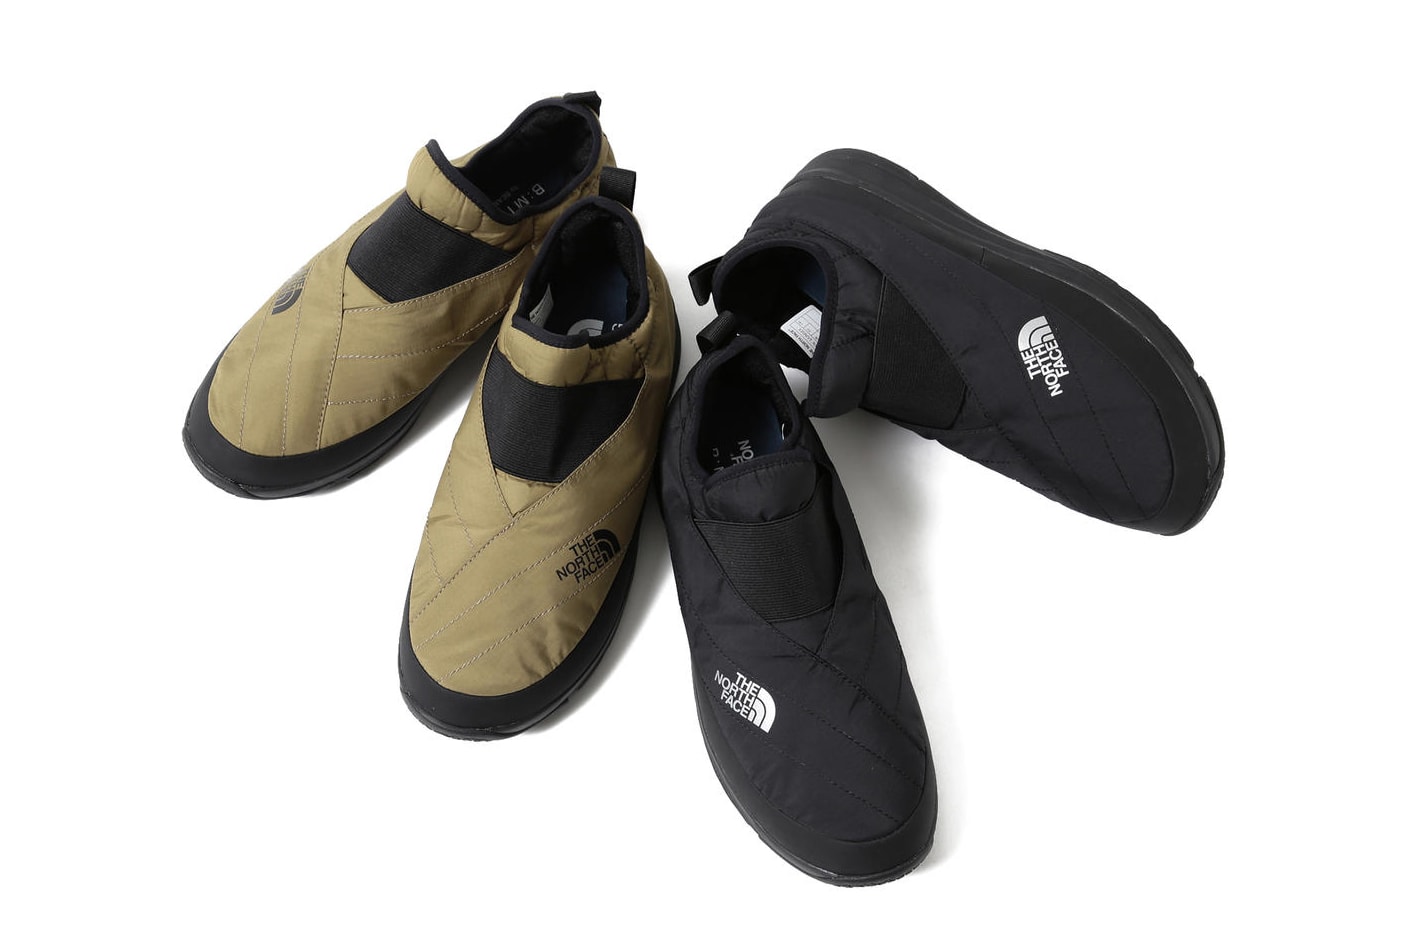 beams BEAMS The North Face Kimono Nuptse Shoes life store footwear slippers olive green black november 2018 drop release date collaboration insulated camp padded japan release date info buy purchase sale sell exclusive